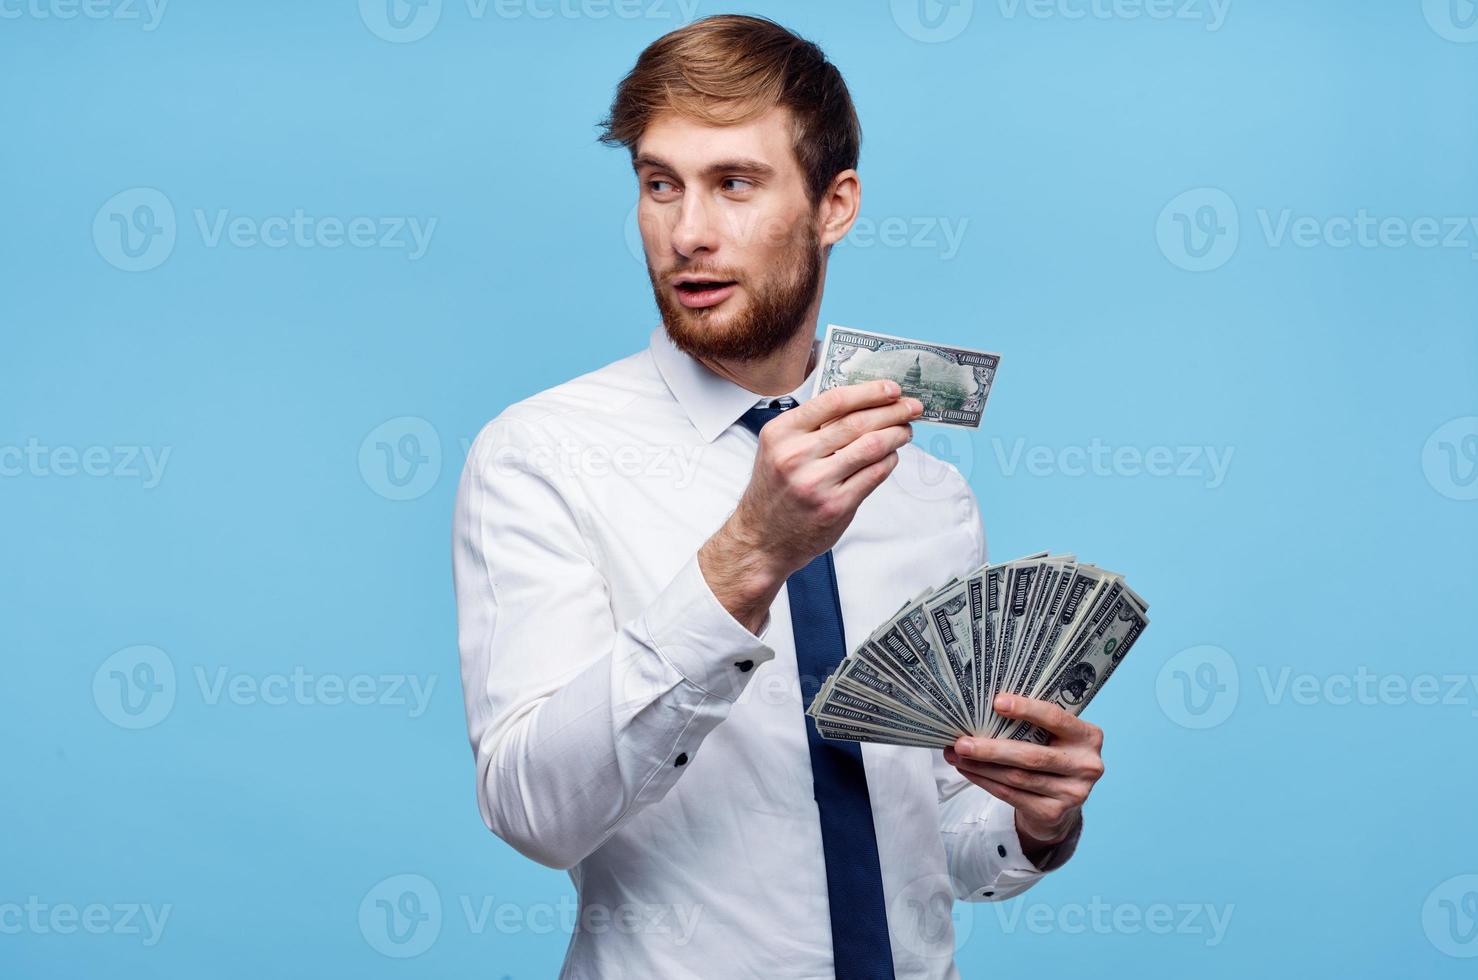 business man in shirt with tie money finance autumn background cropped view photo